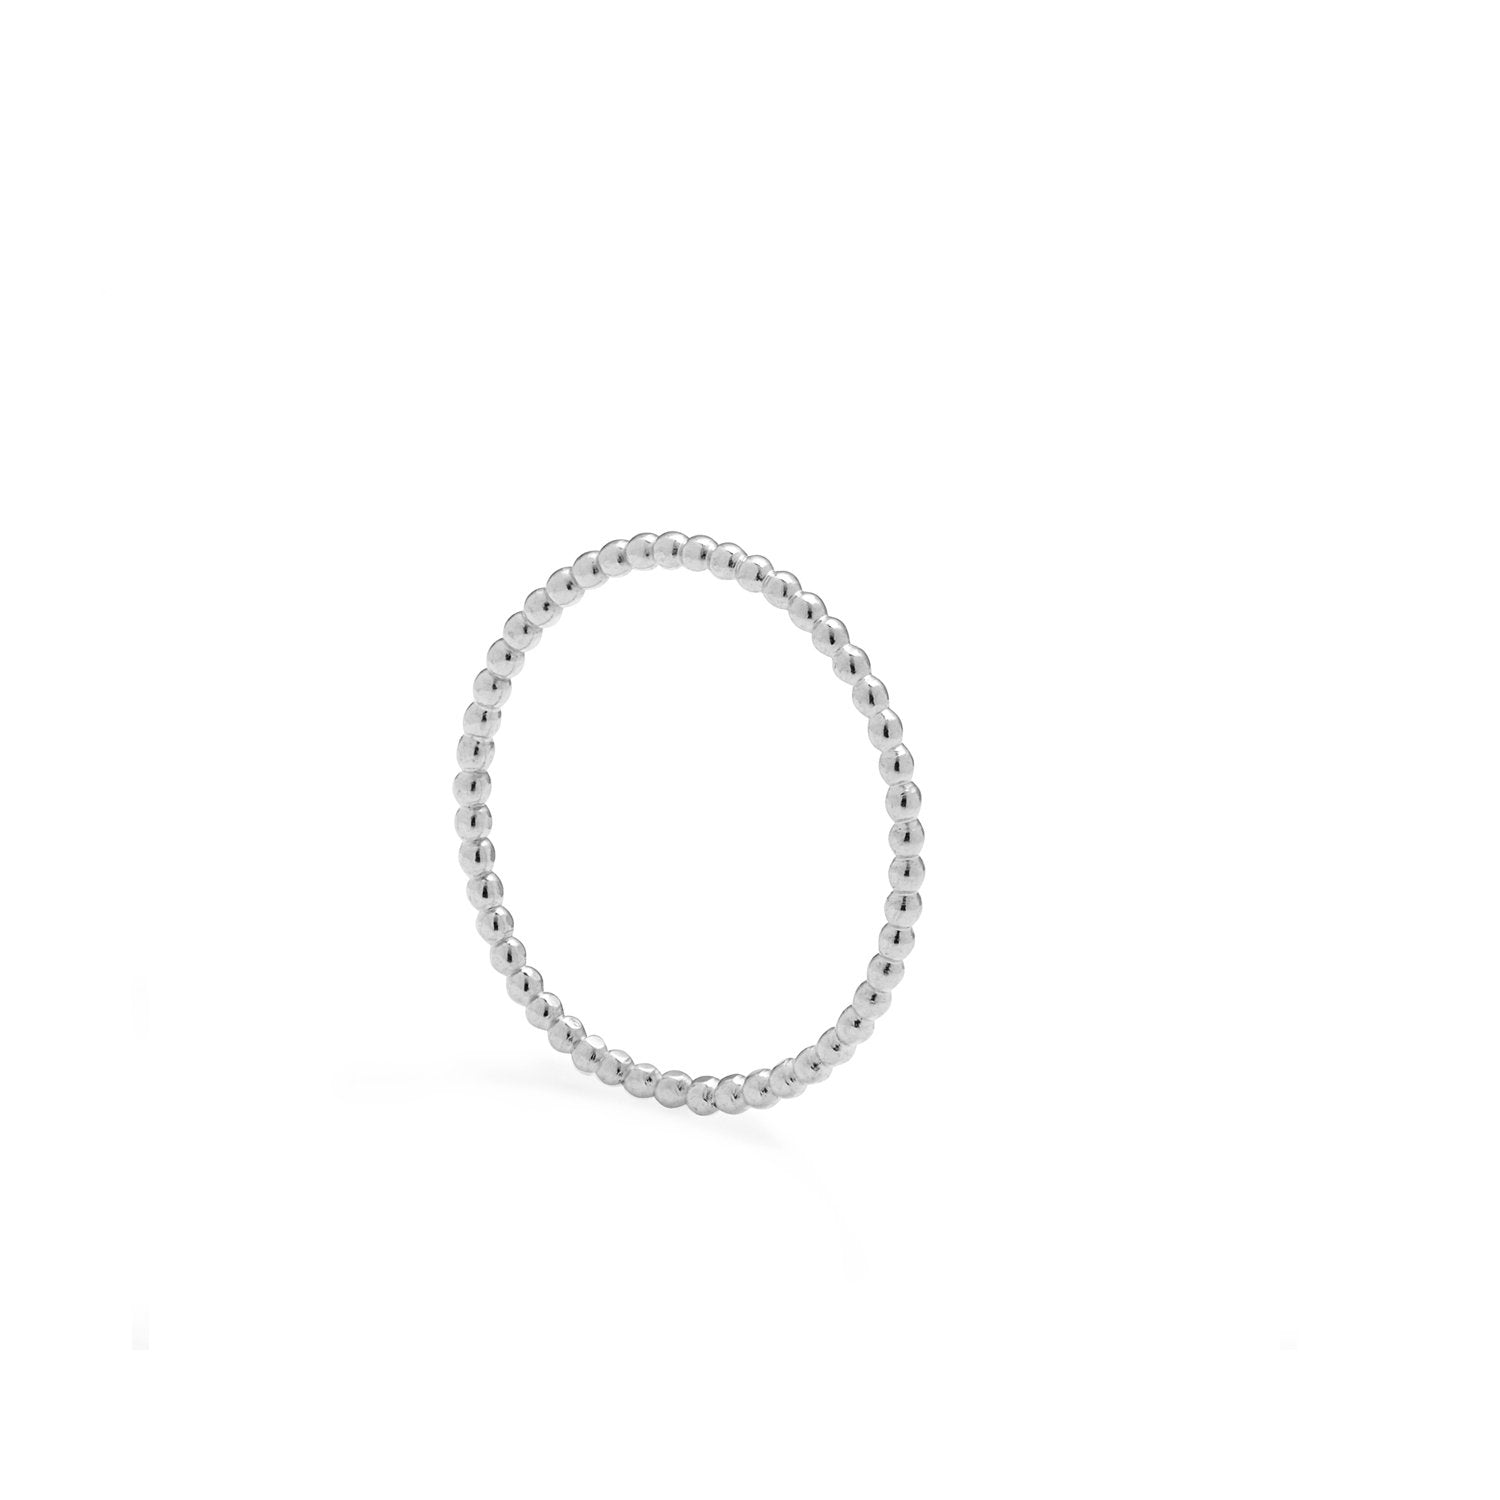 Skinny Sphere Stacking Ring - Silver - Myia Bonner Jewellery